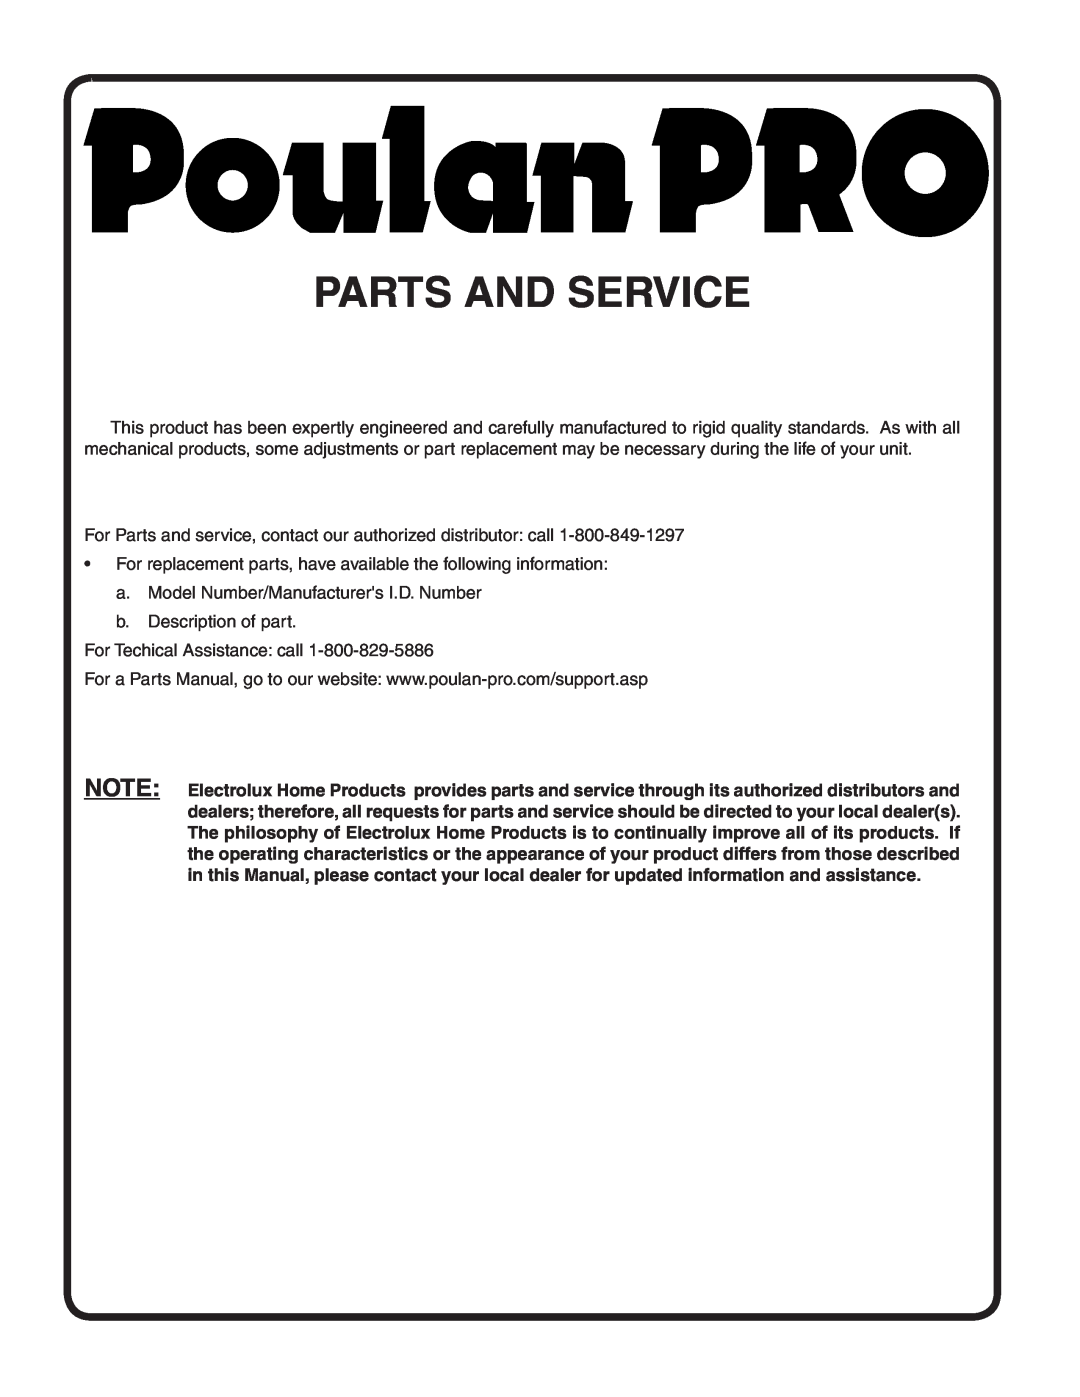 Poulan 404489 manual Parts And Service 